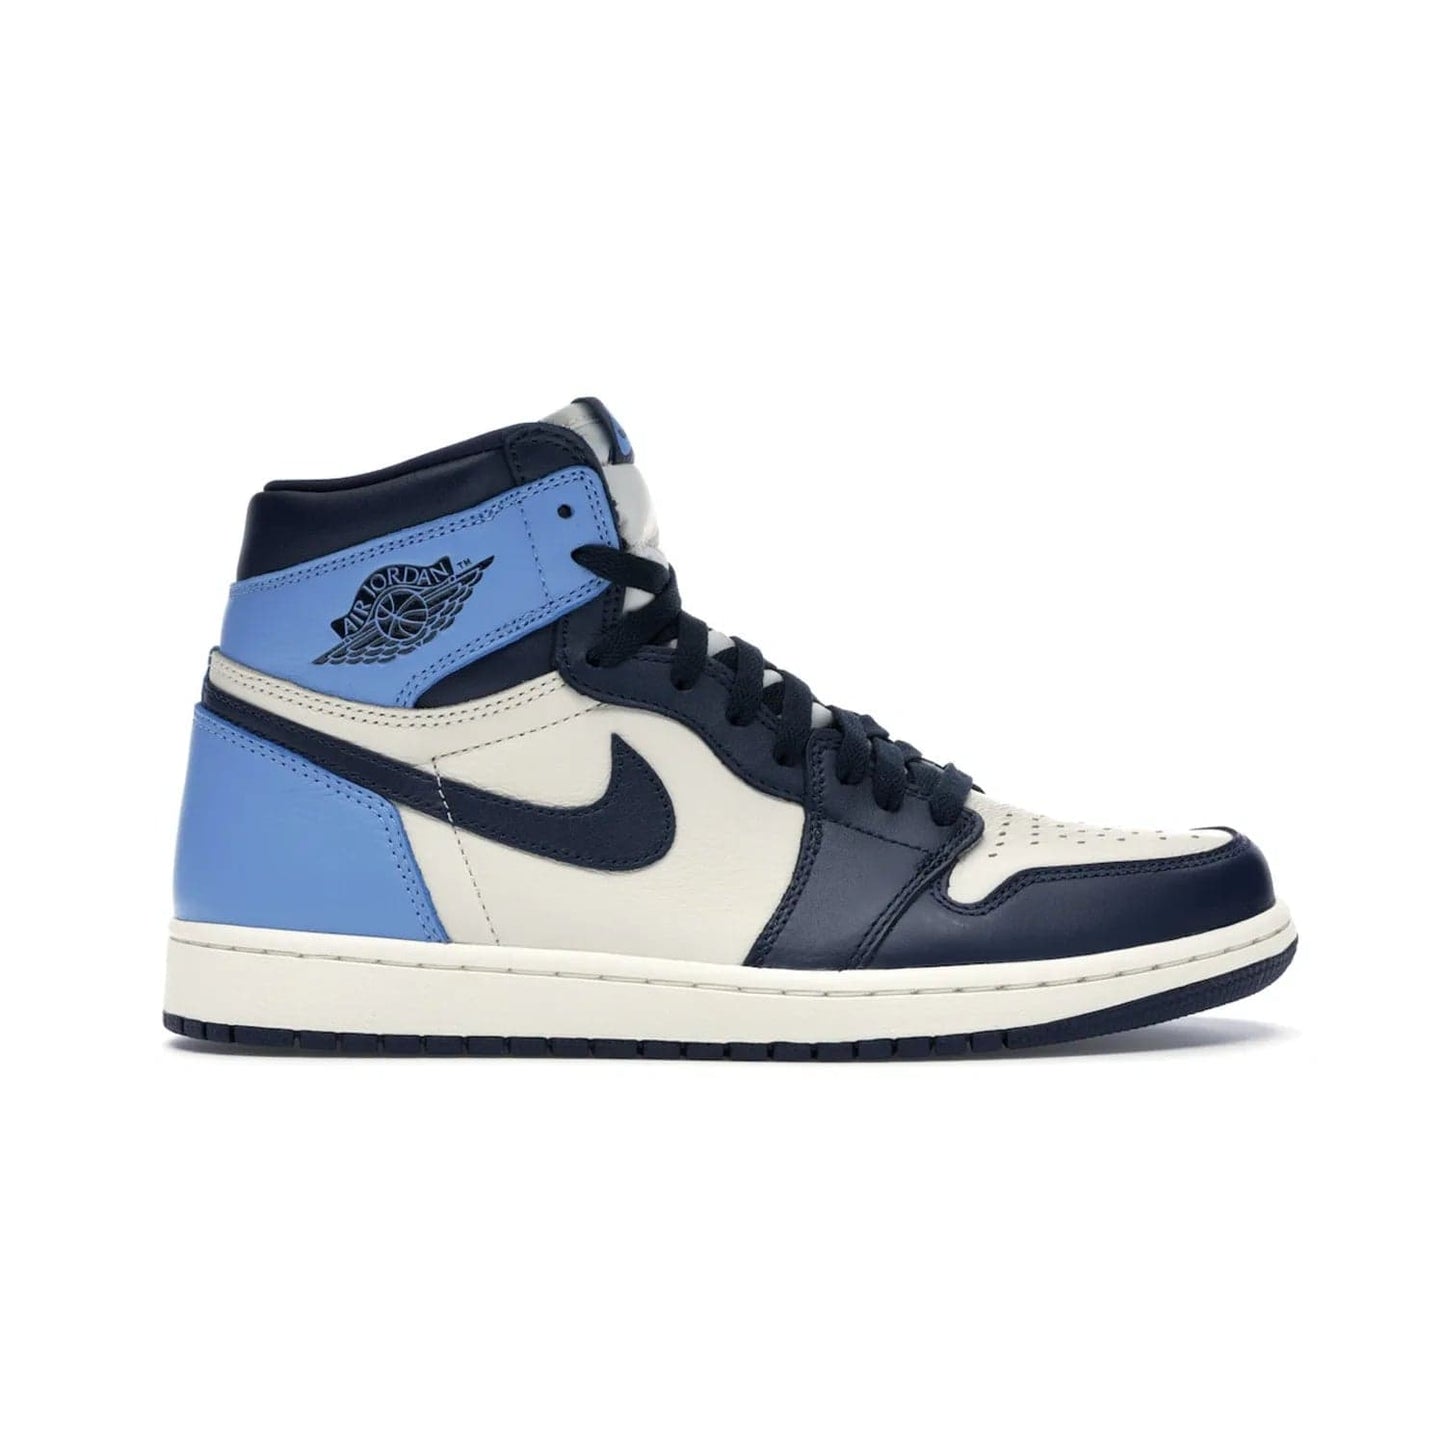 Jordan 1 Retro High Obsidian UNC - Image 1 - Only at www.BallersClubKickz.com - Bring a timeless classic to your wardrobe with the Air Jordan 1 Retro High "Obsidian/University Blue”. A full leather upper combines Obsidian and University Blue detailing for a retro Jordan style. Stitched Jumpman logo pays tribute to UNC. Experience classic style with a timeless sneaker.